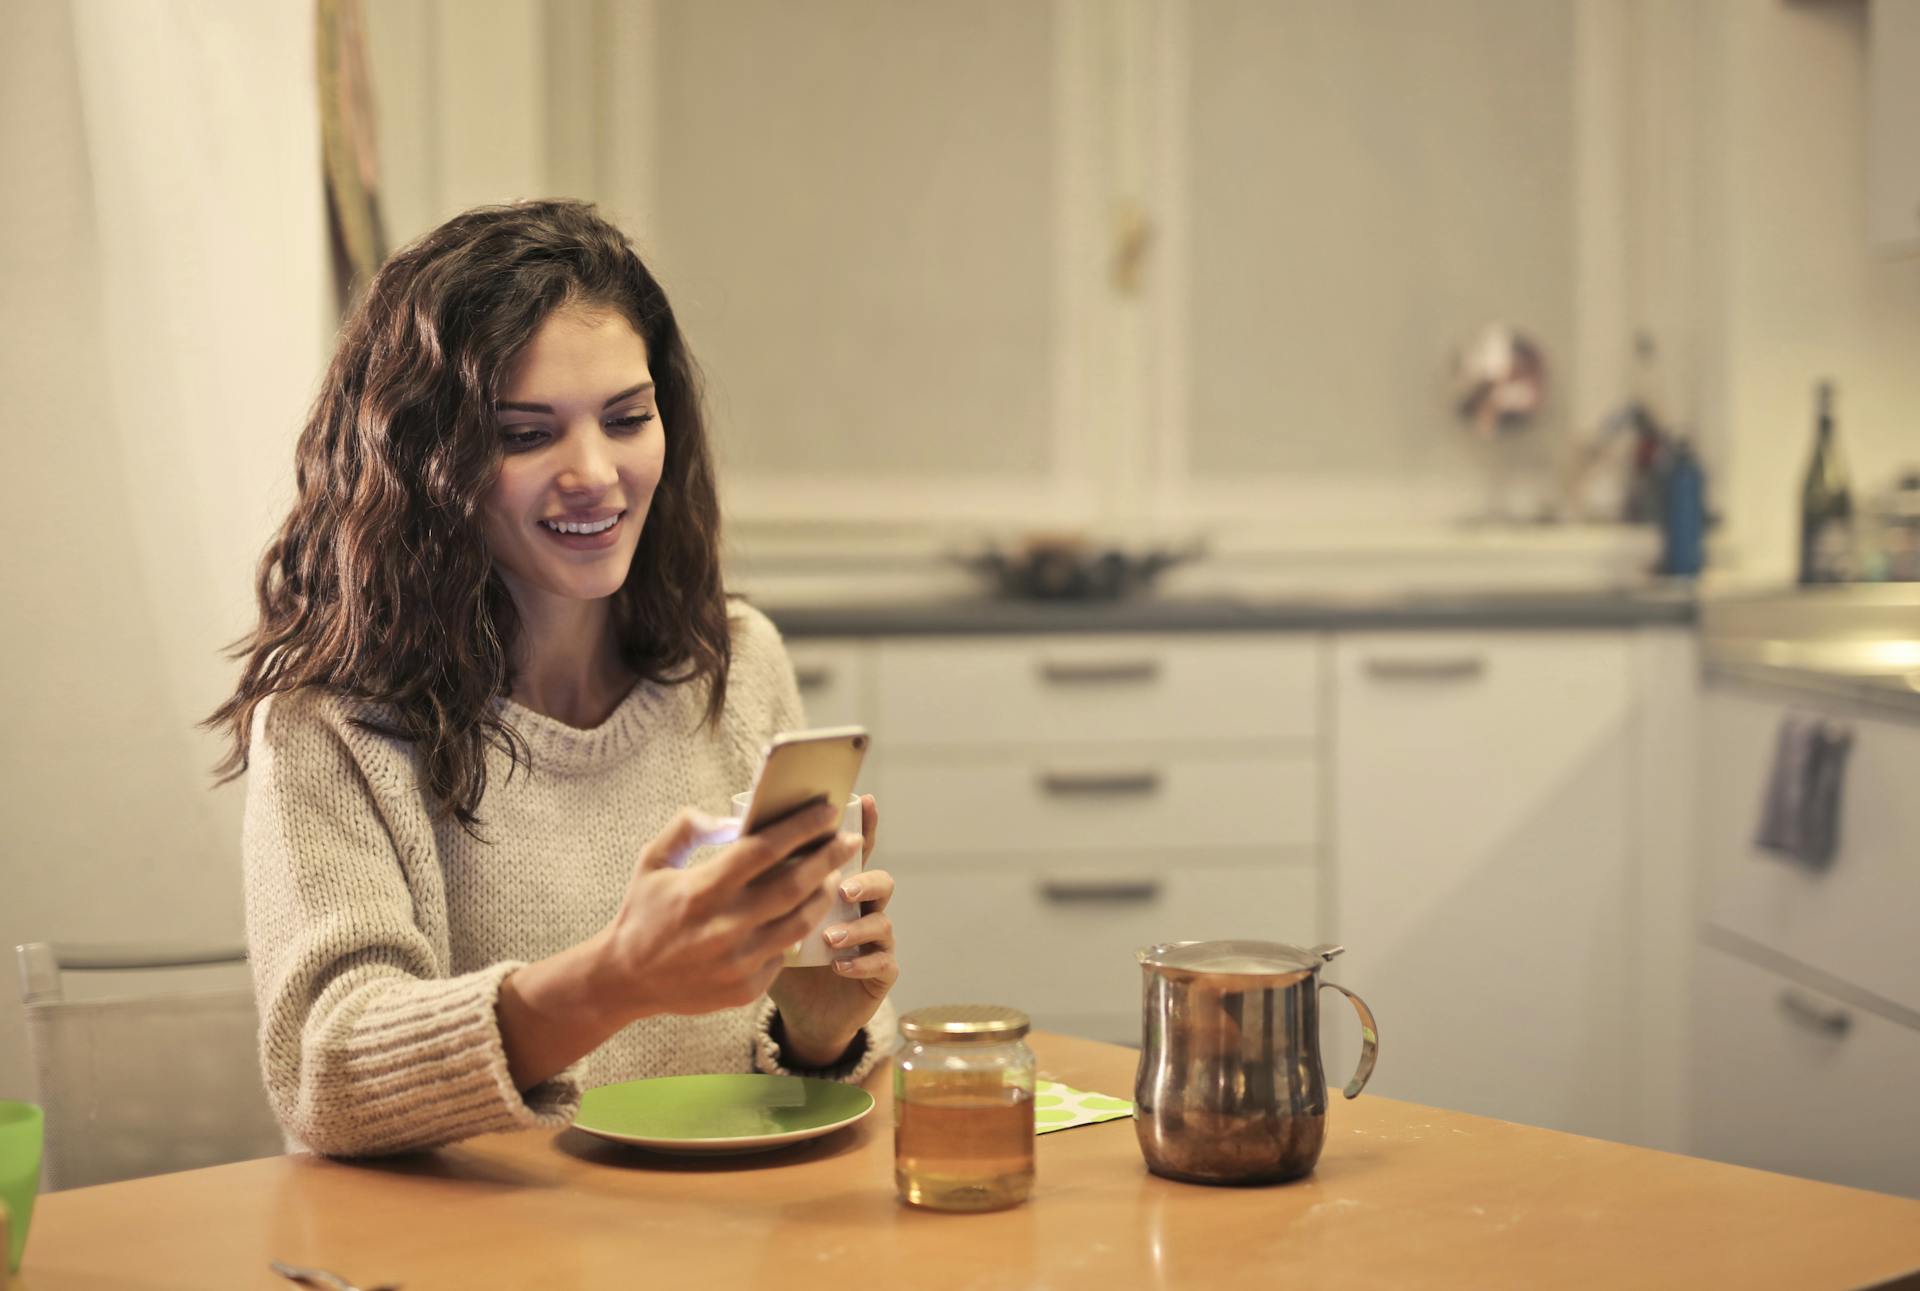 A young woman drinking tea and using her phone | Source: Pexels